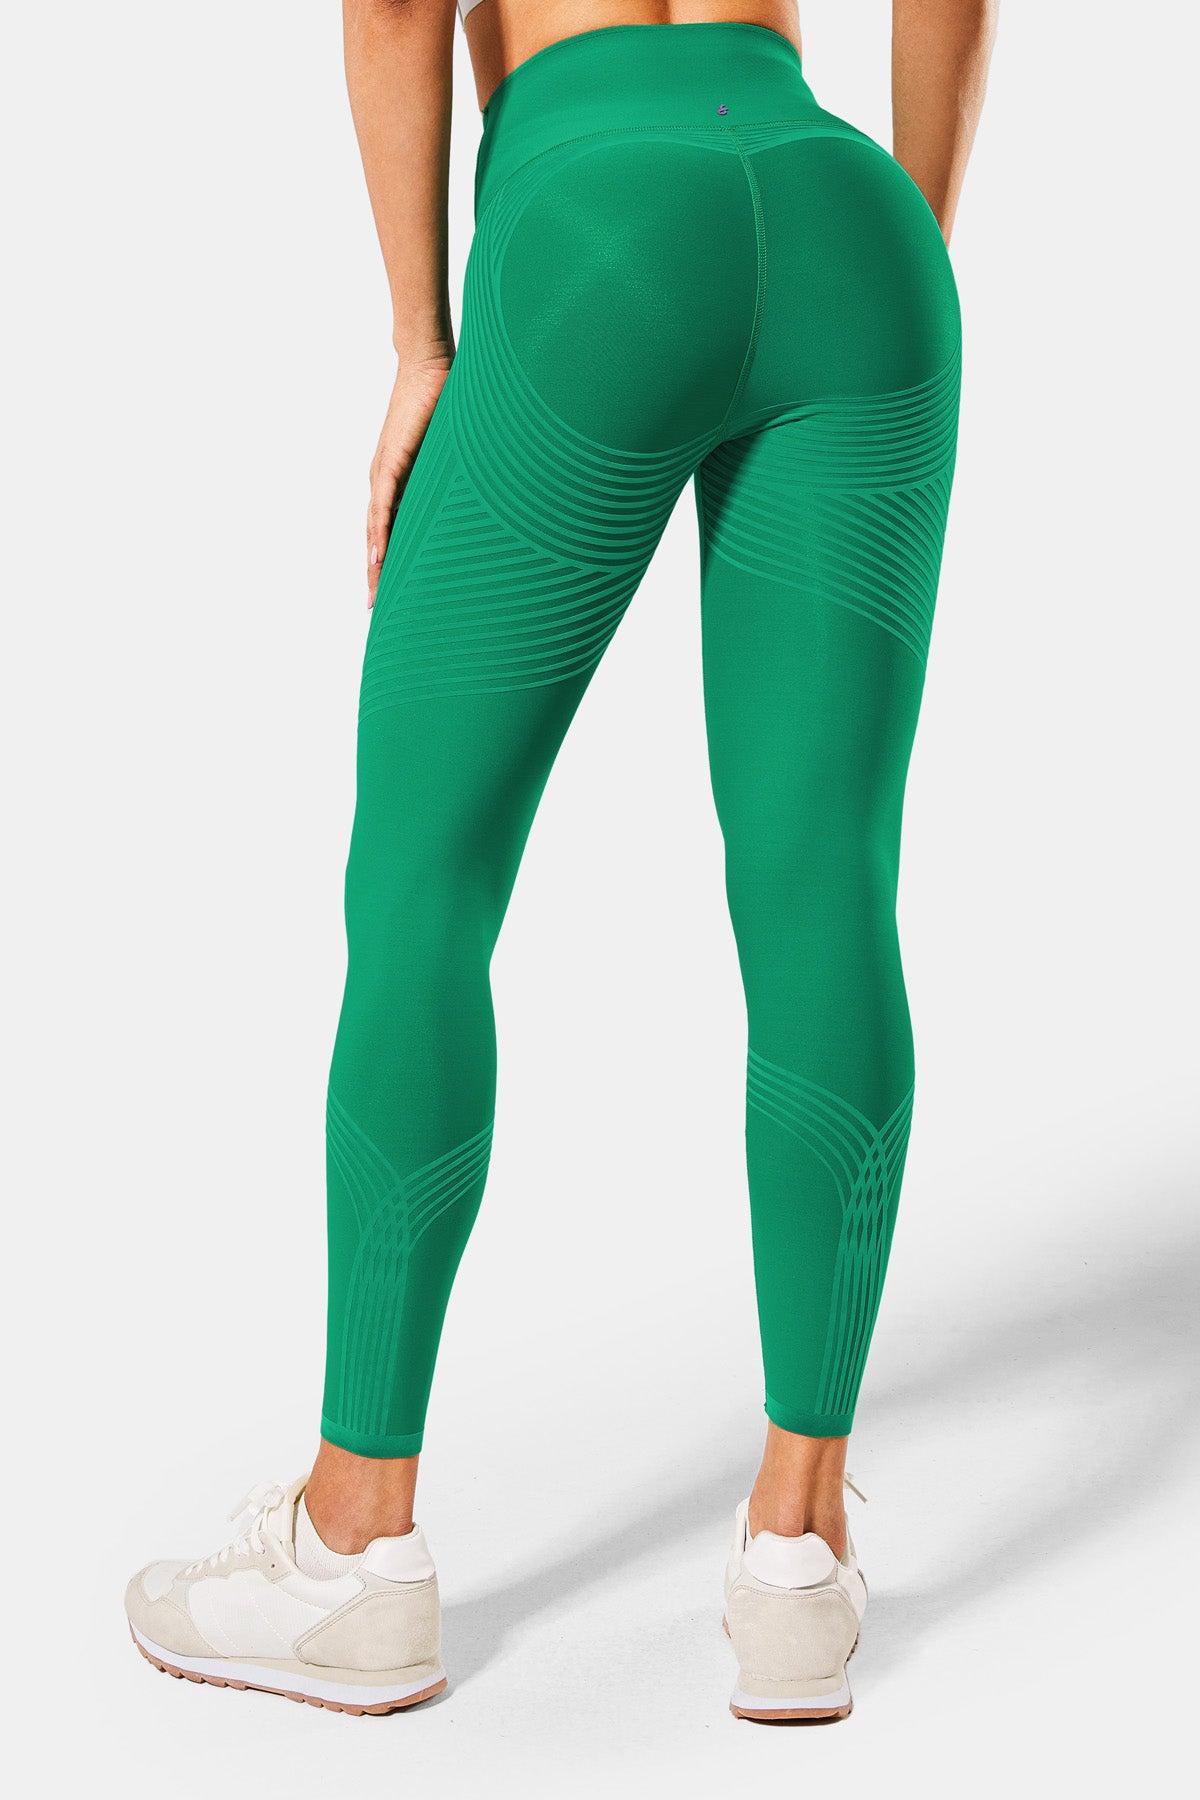 MyStyle-New Addition!!! Speedline Leggings will be the most